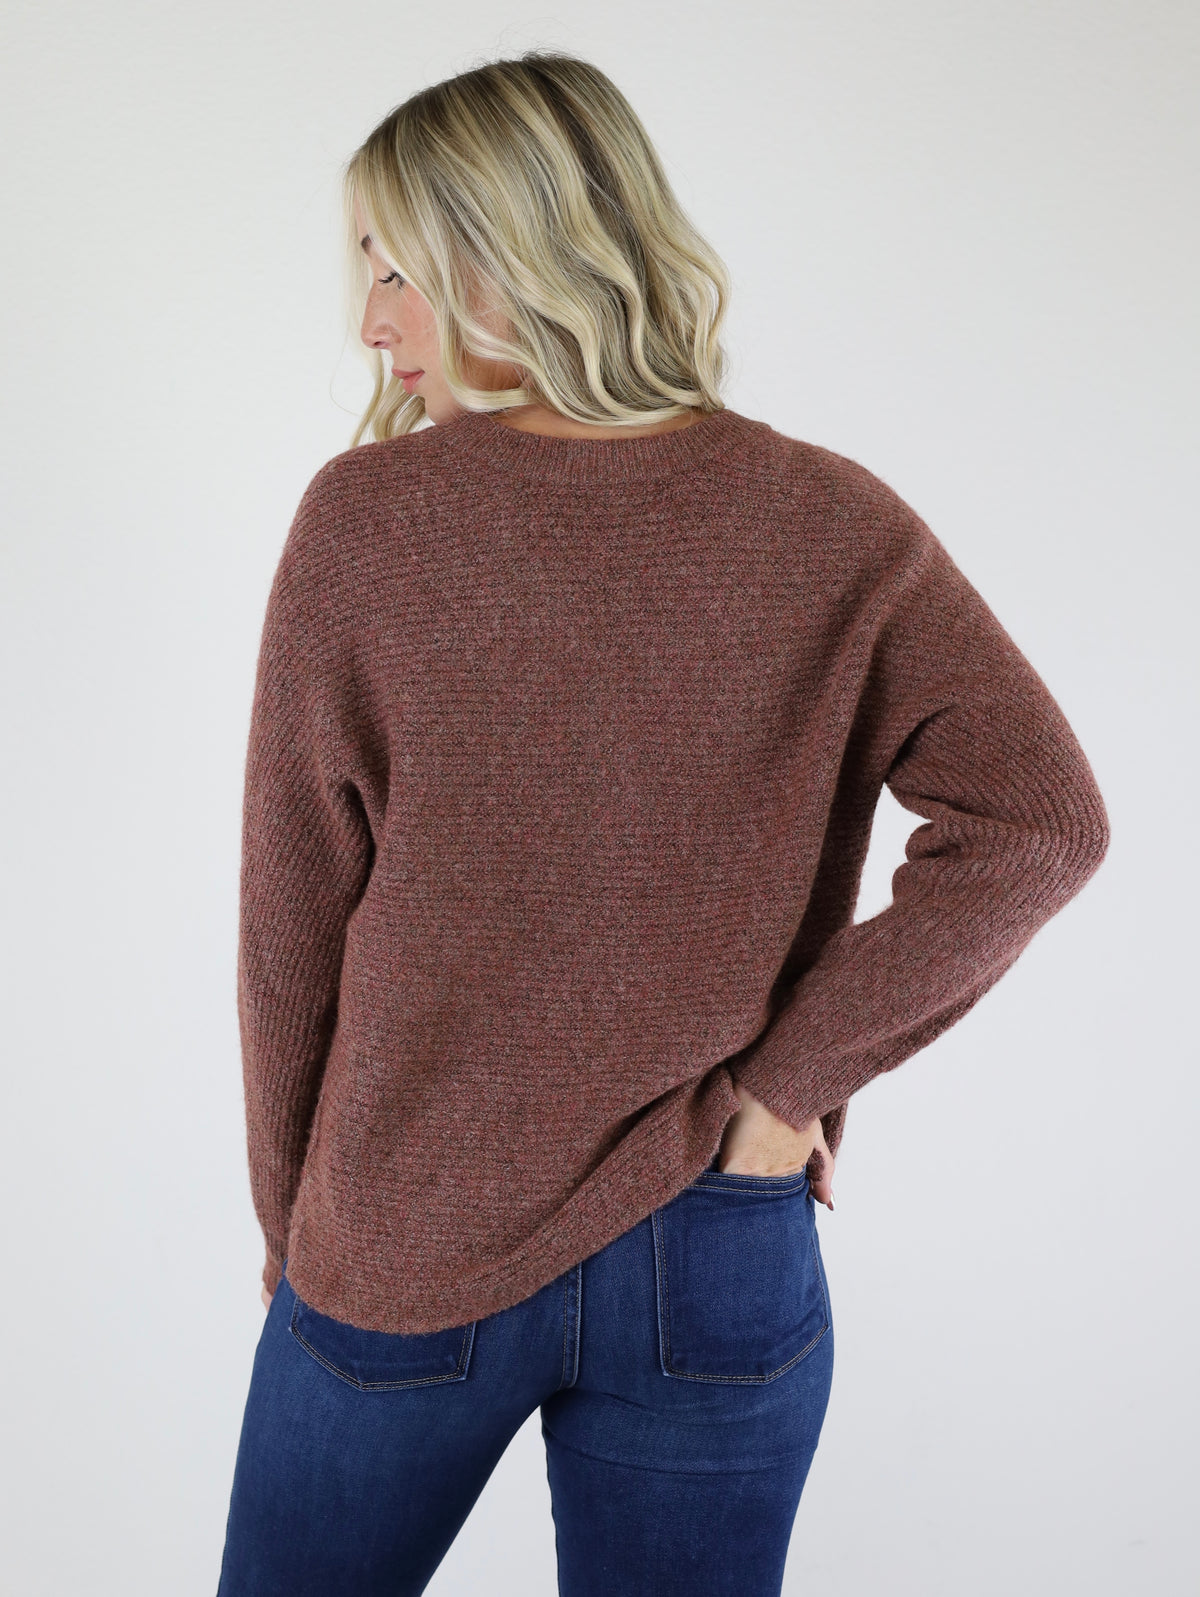 Jeannie Button Front Loose Weave Sweater - Maroon